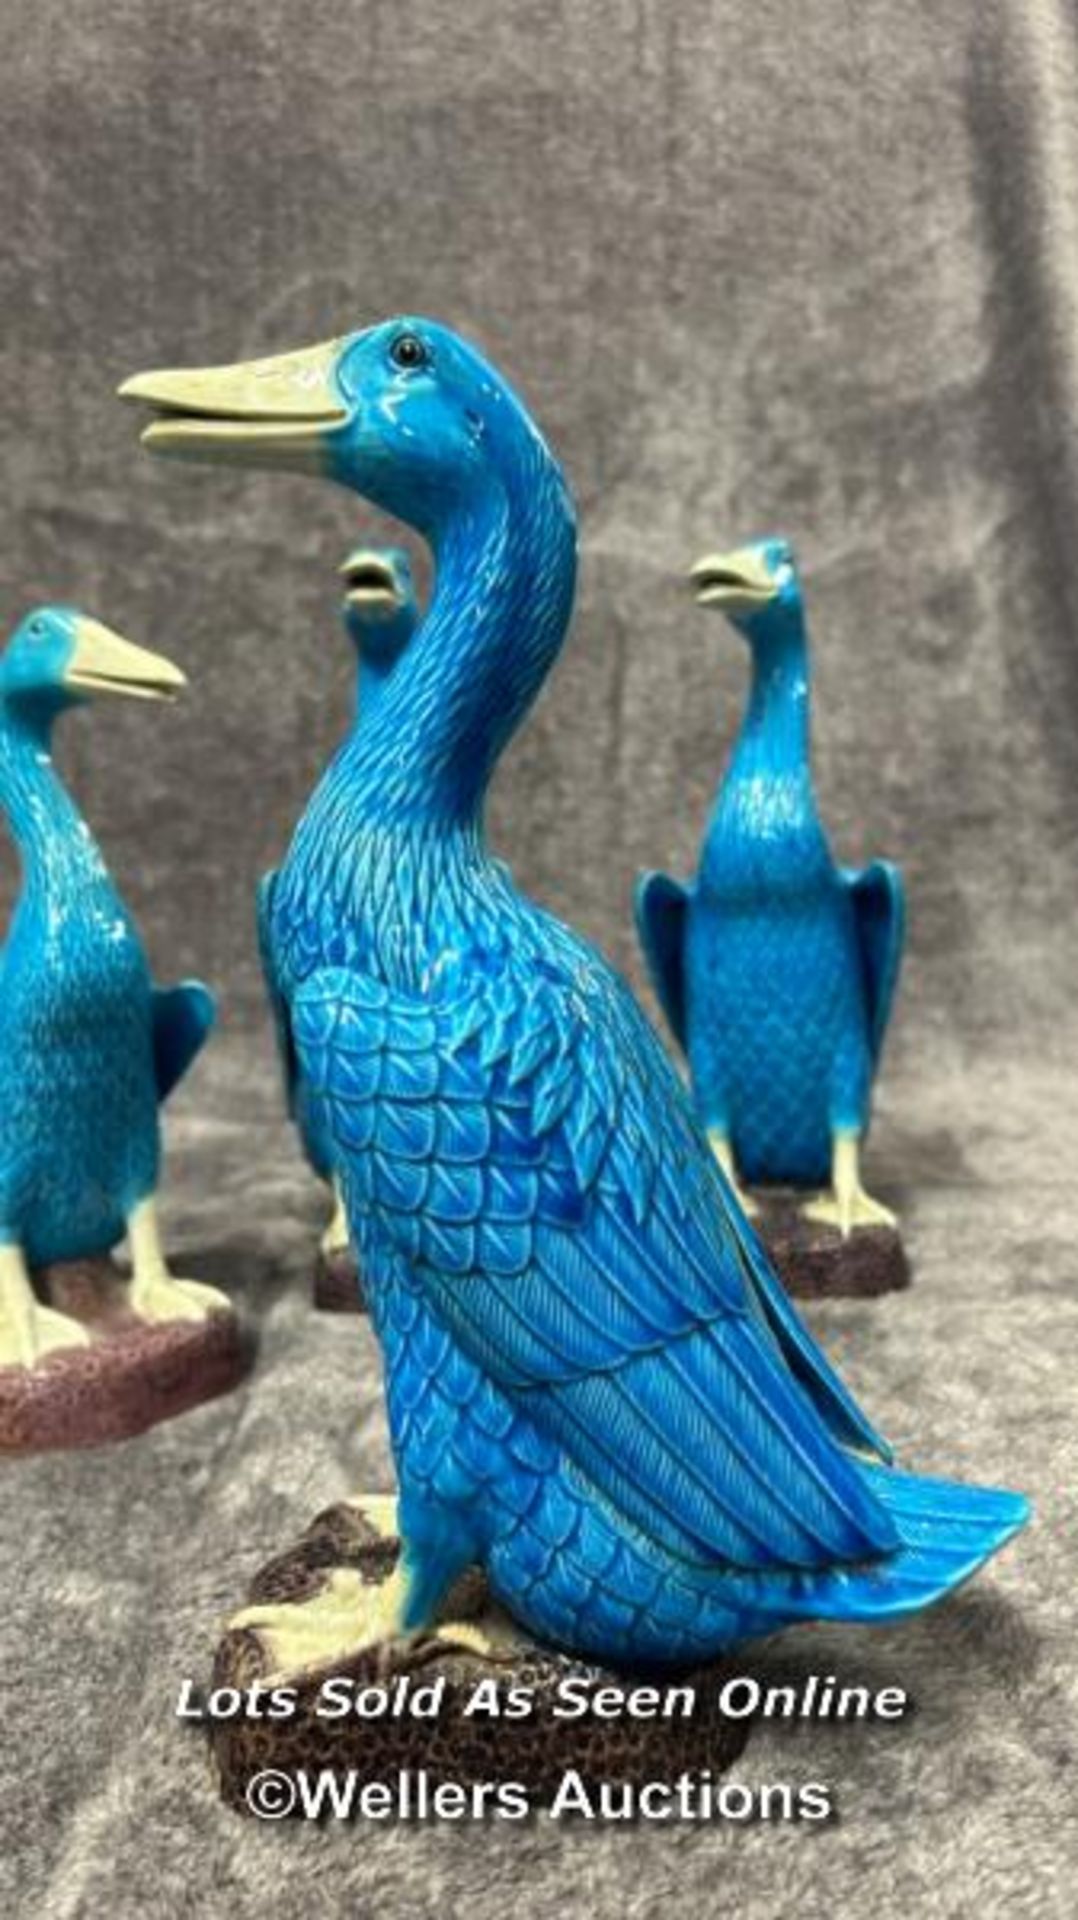 Set of six Chinese turquoise glazed porcelain duck figures, the tallest 29cm high / AN6 - Image 3 of 17